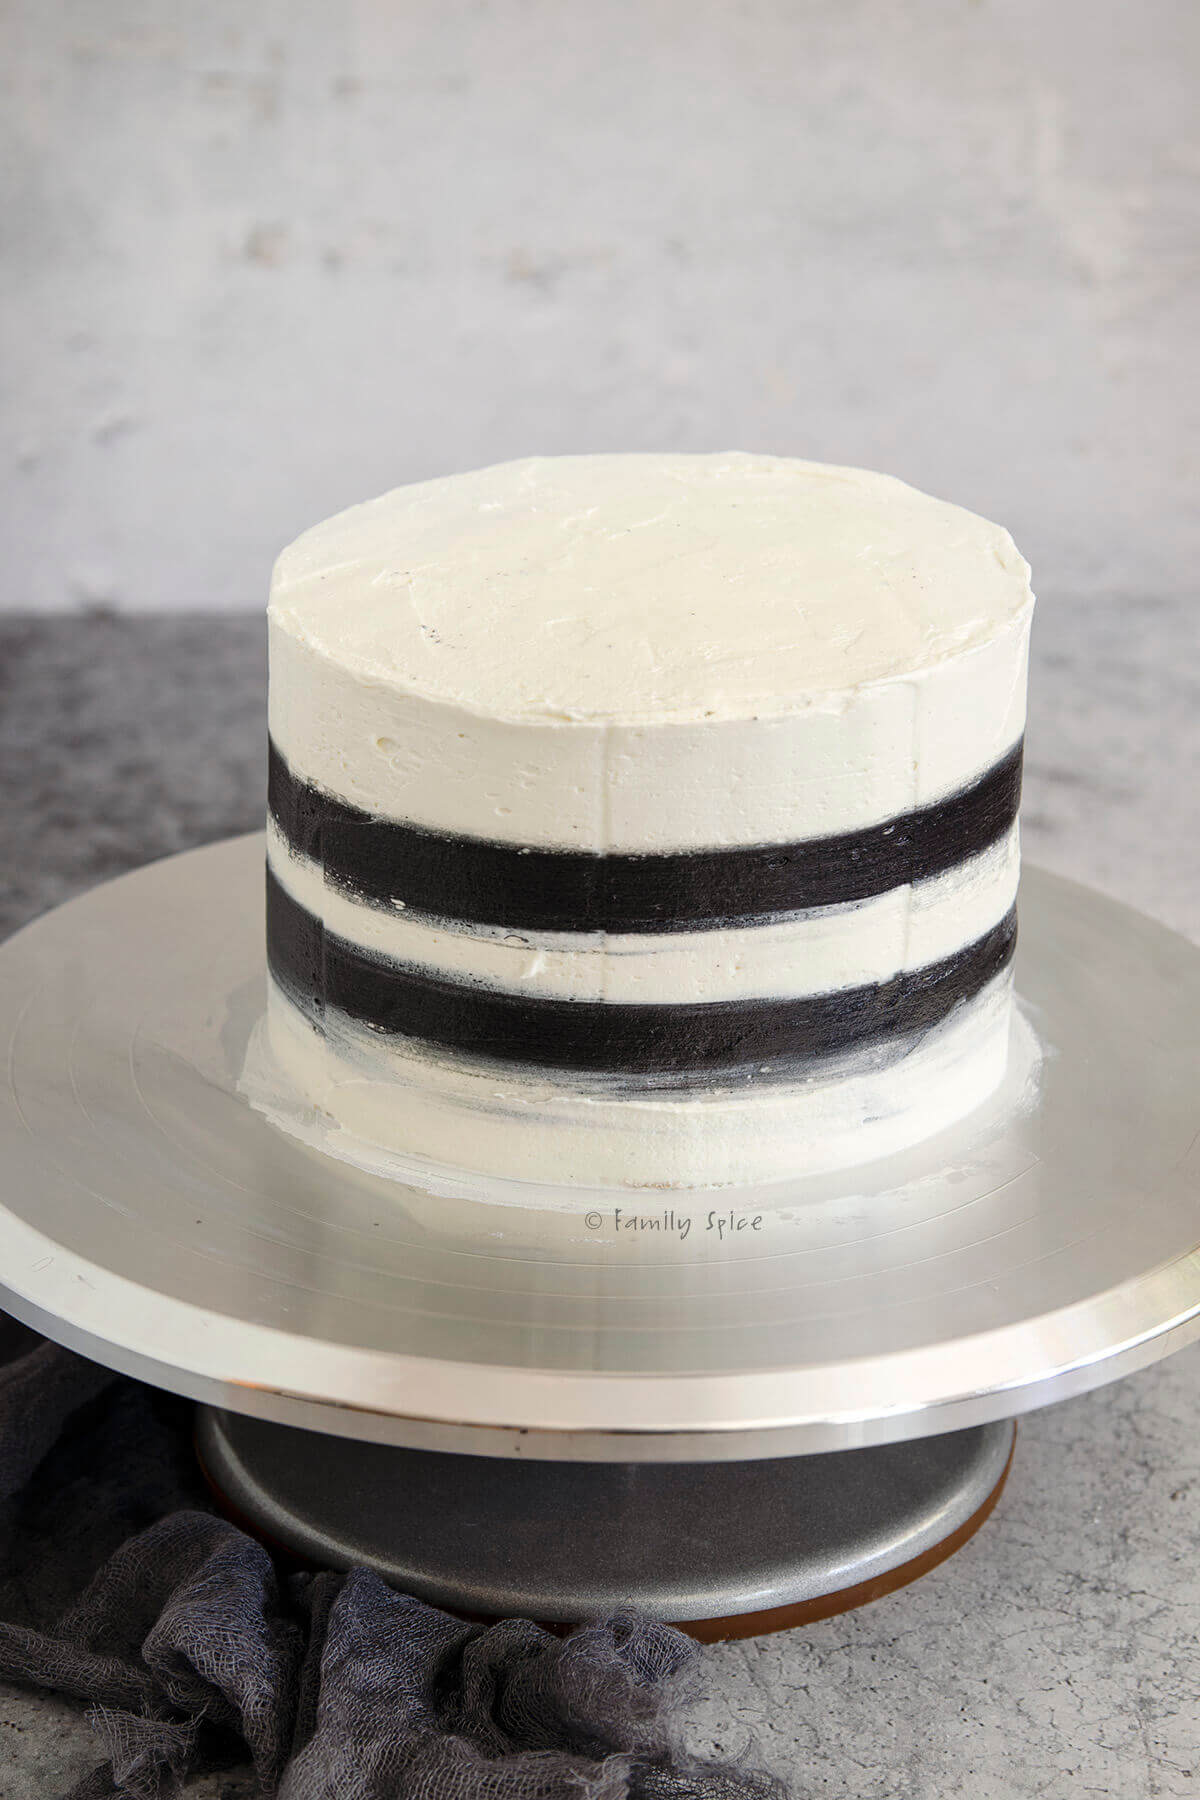 A white frosted cake with 2 black stripes on a stainless cake stand